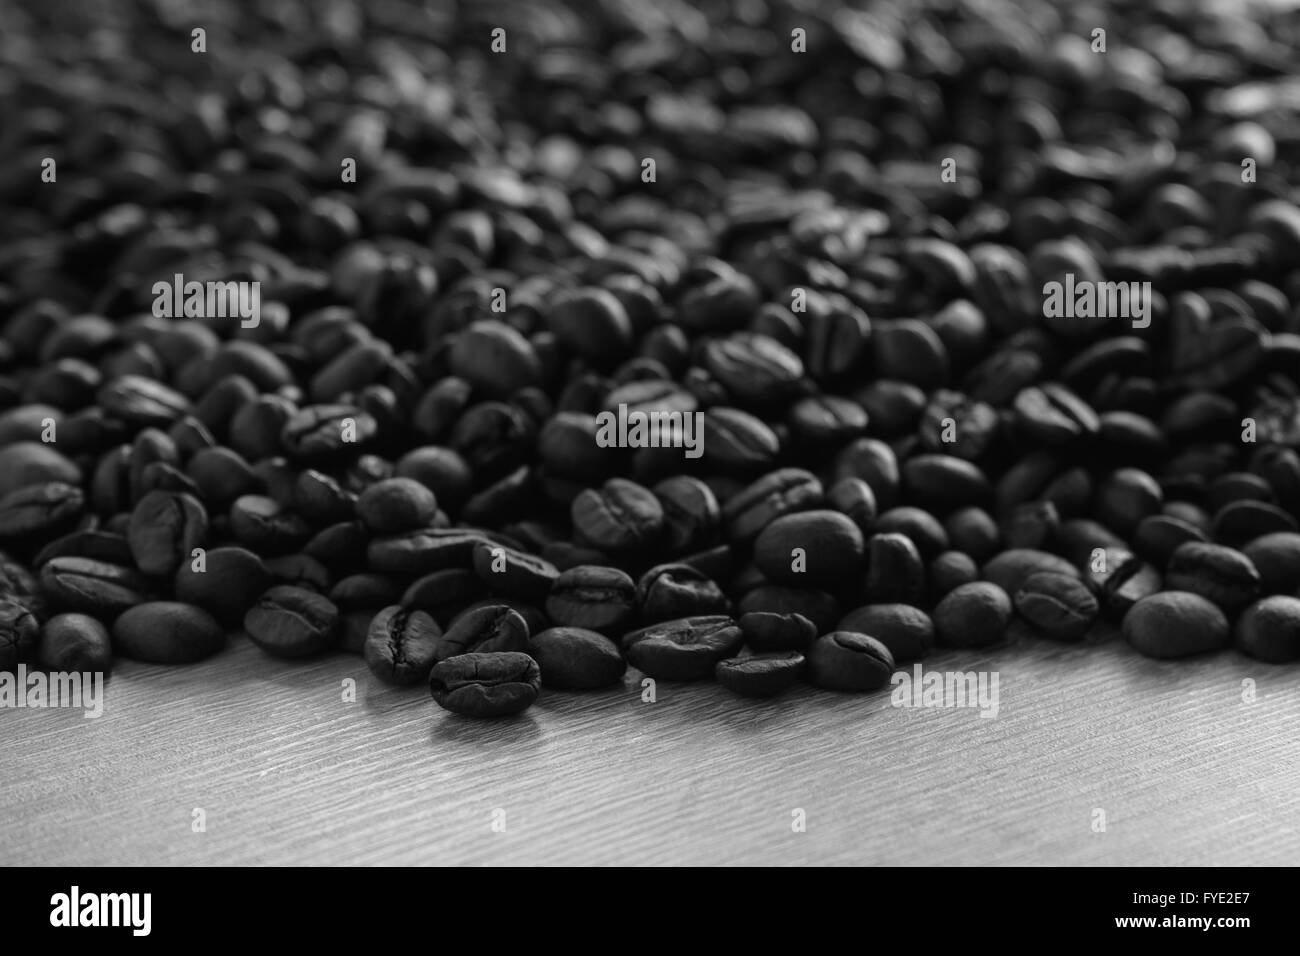 Abstract closeup coffee beans on wooden background with selective focus at front beans, black and white image Stock Photo